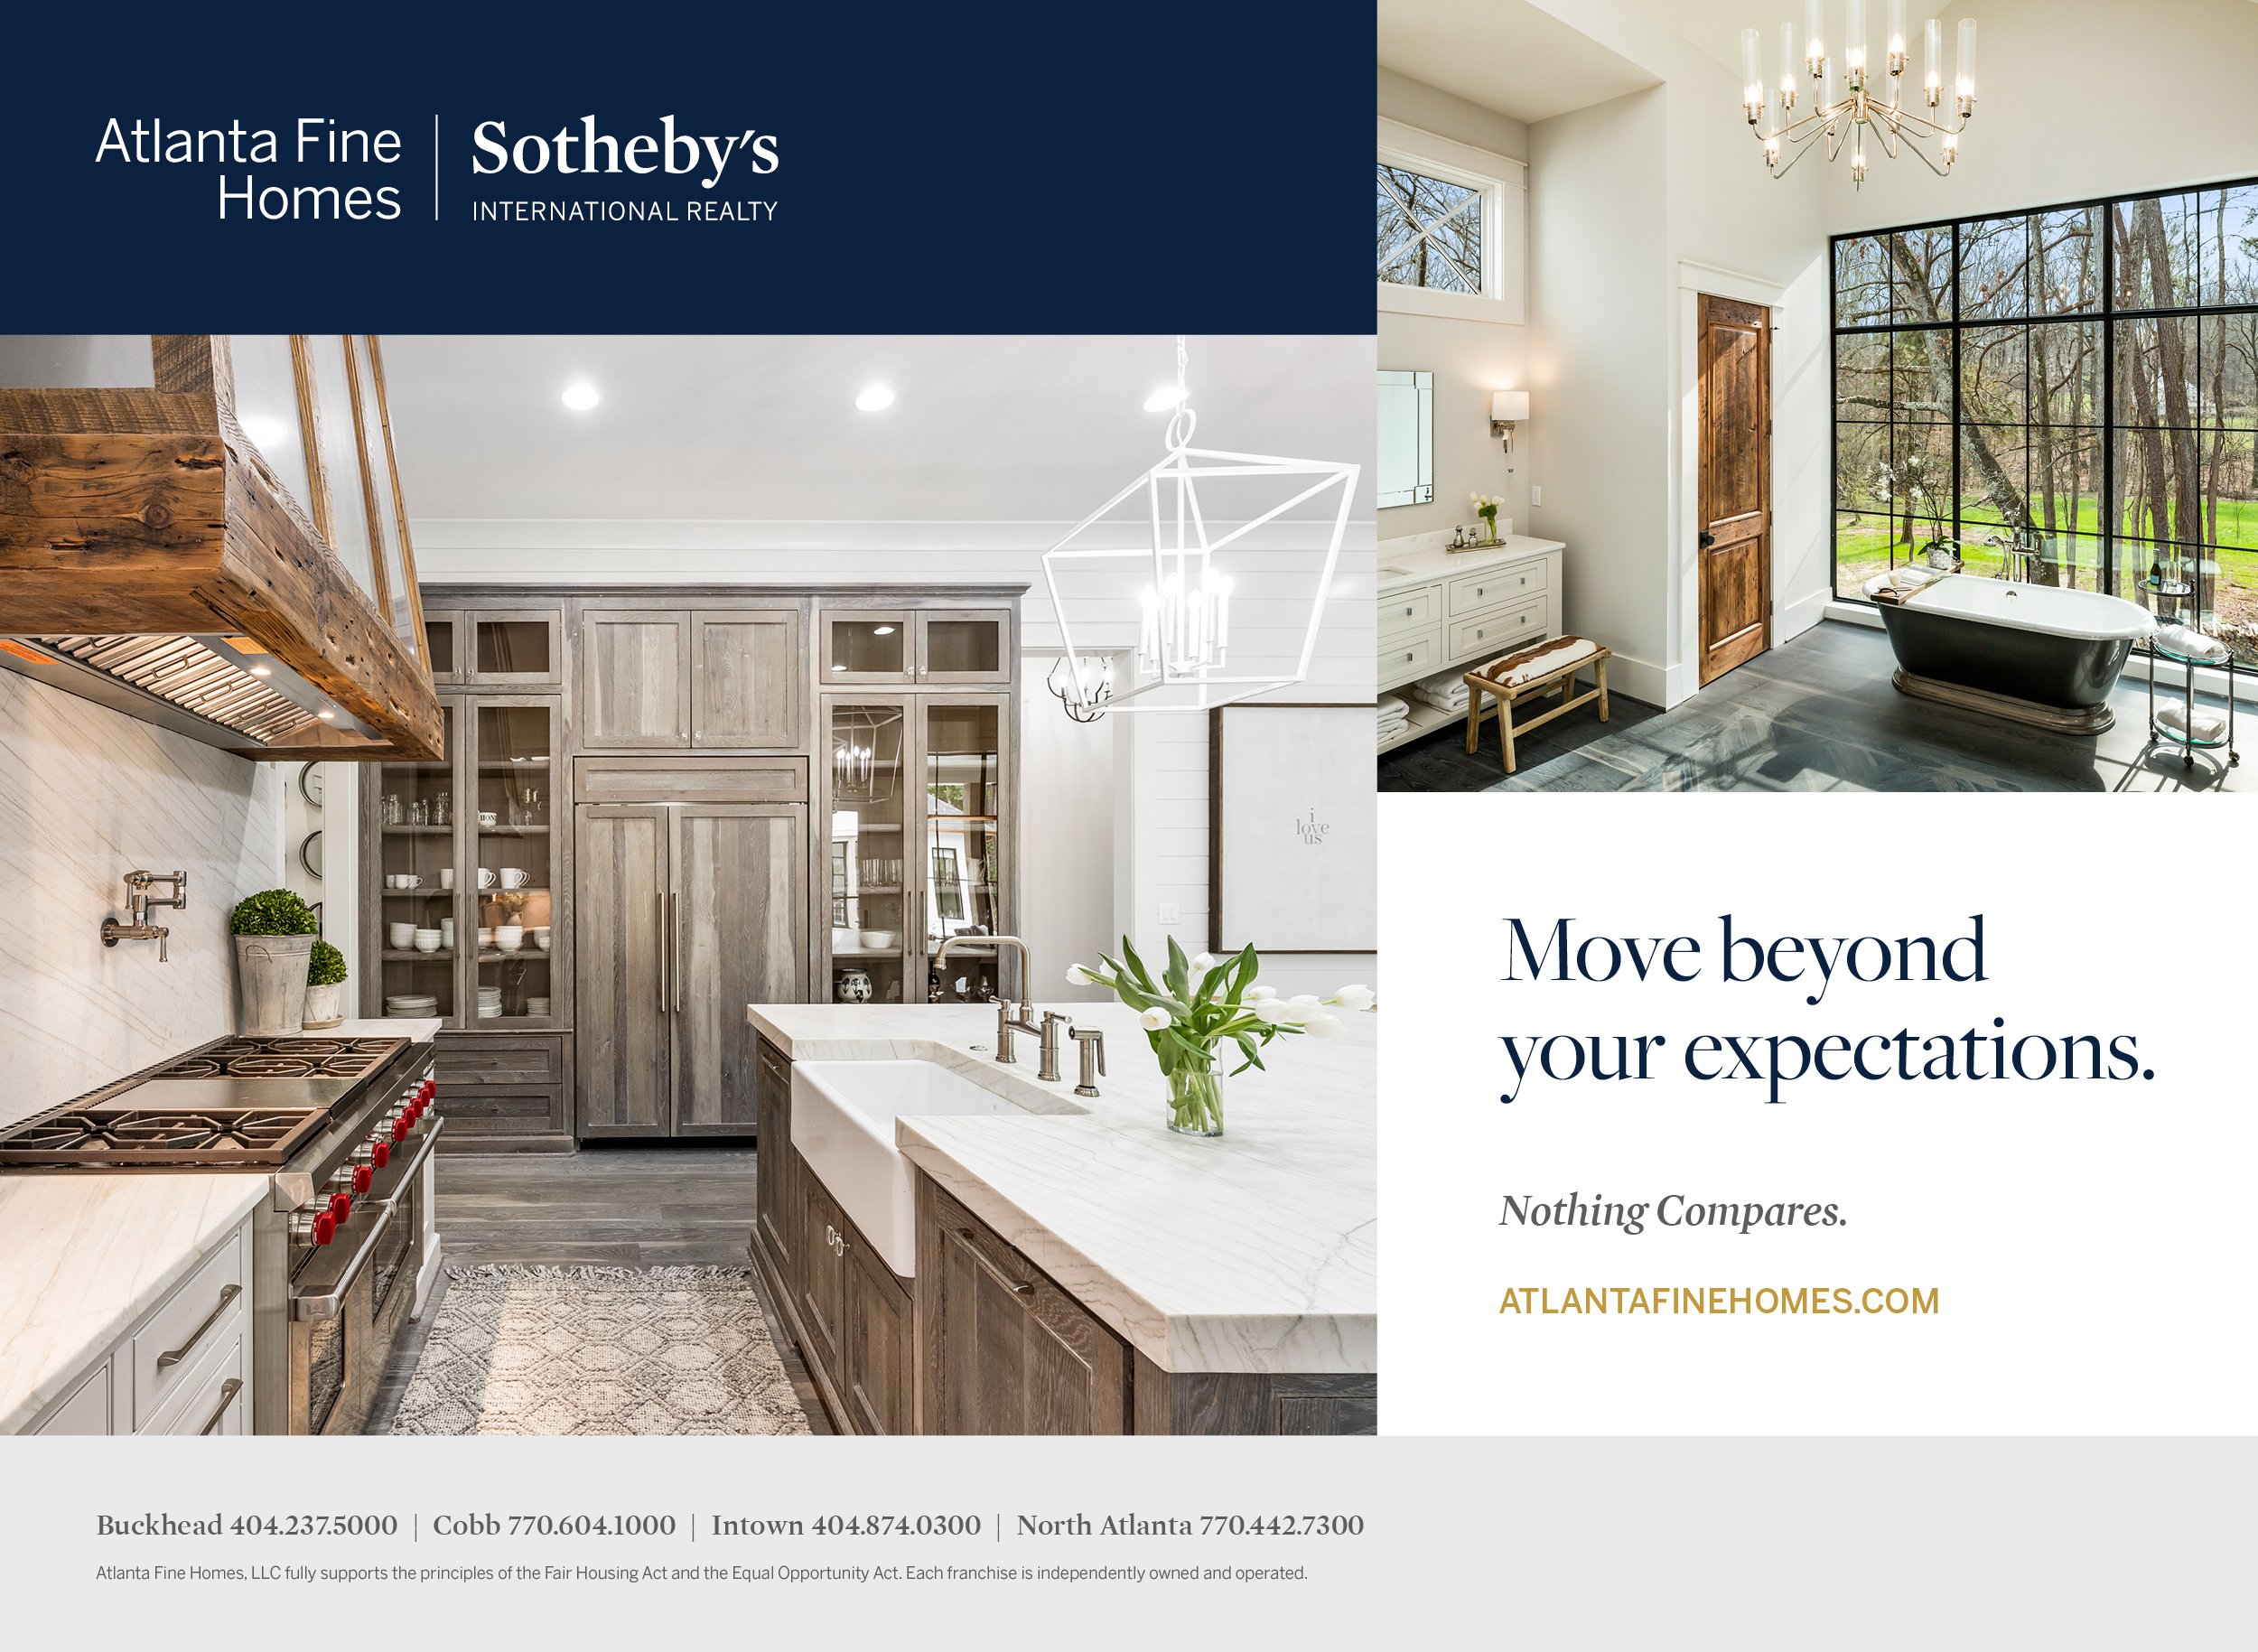 Atlanta Fine Homes | Sotheby's International Realty: Move Beyond Your Expectations